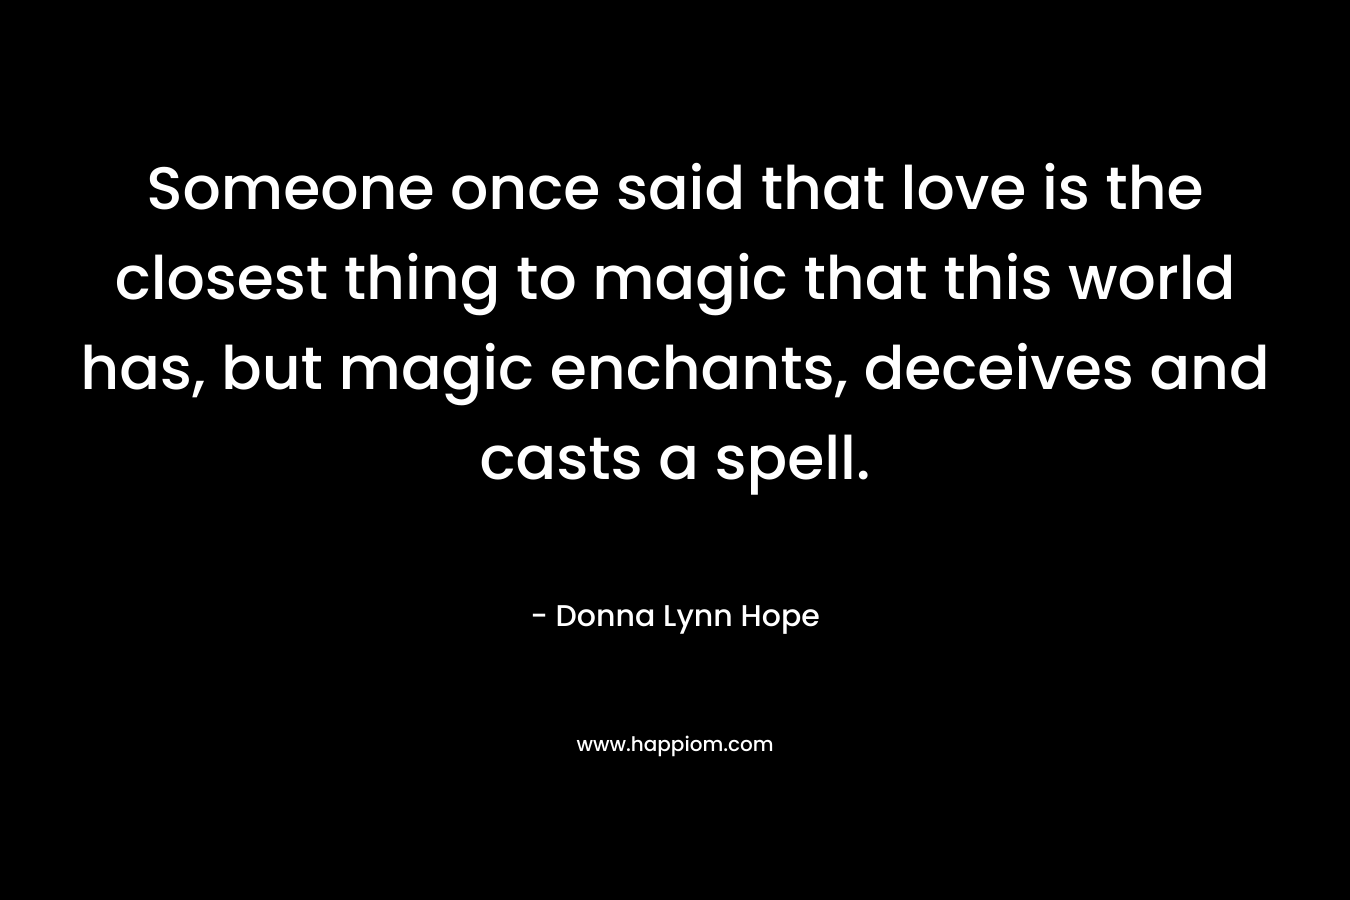 Someone once said that love is the closest thing to magic that this world has, but magic enchants, deceives and casts a spell. – Donna Lynn Hope